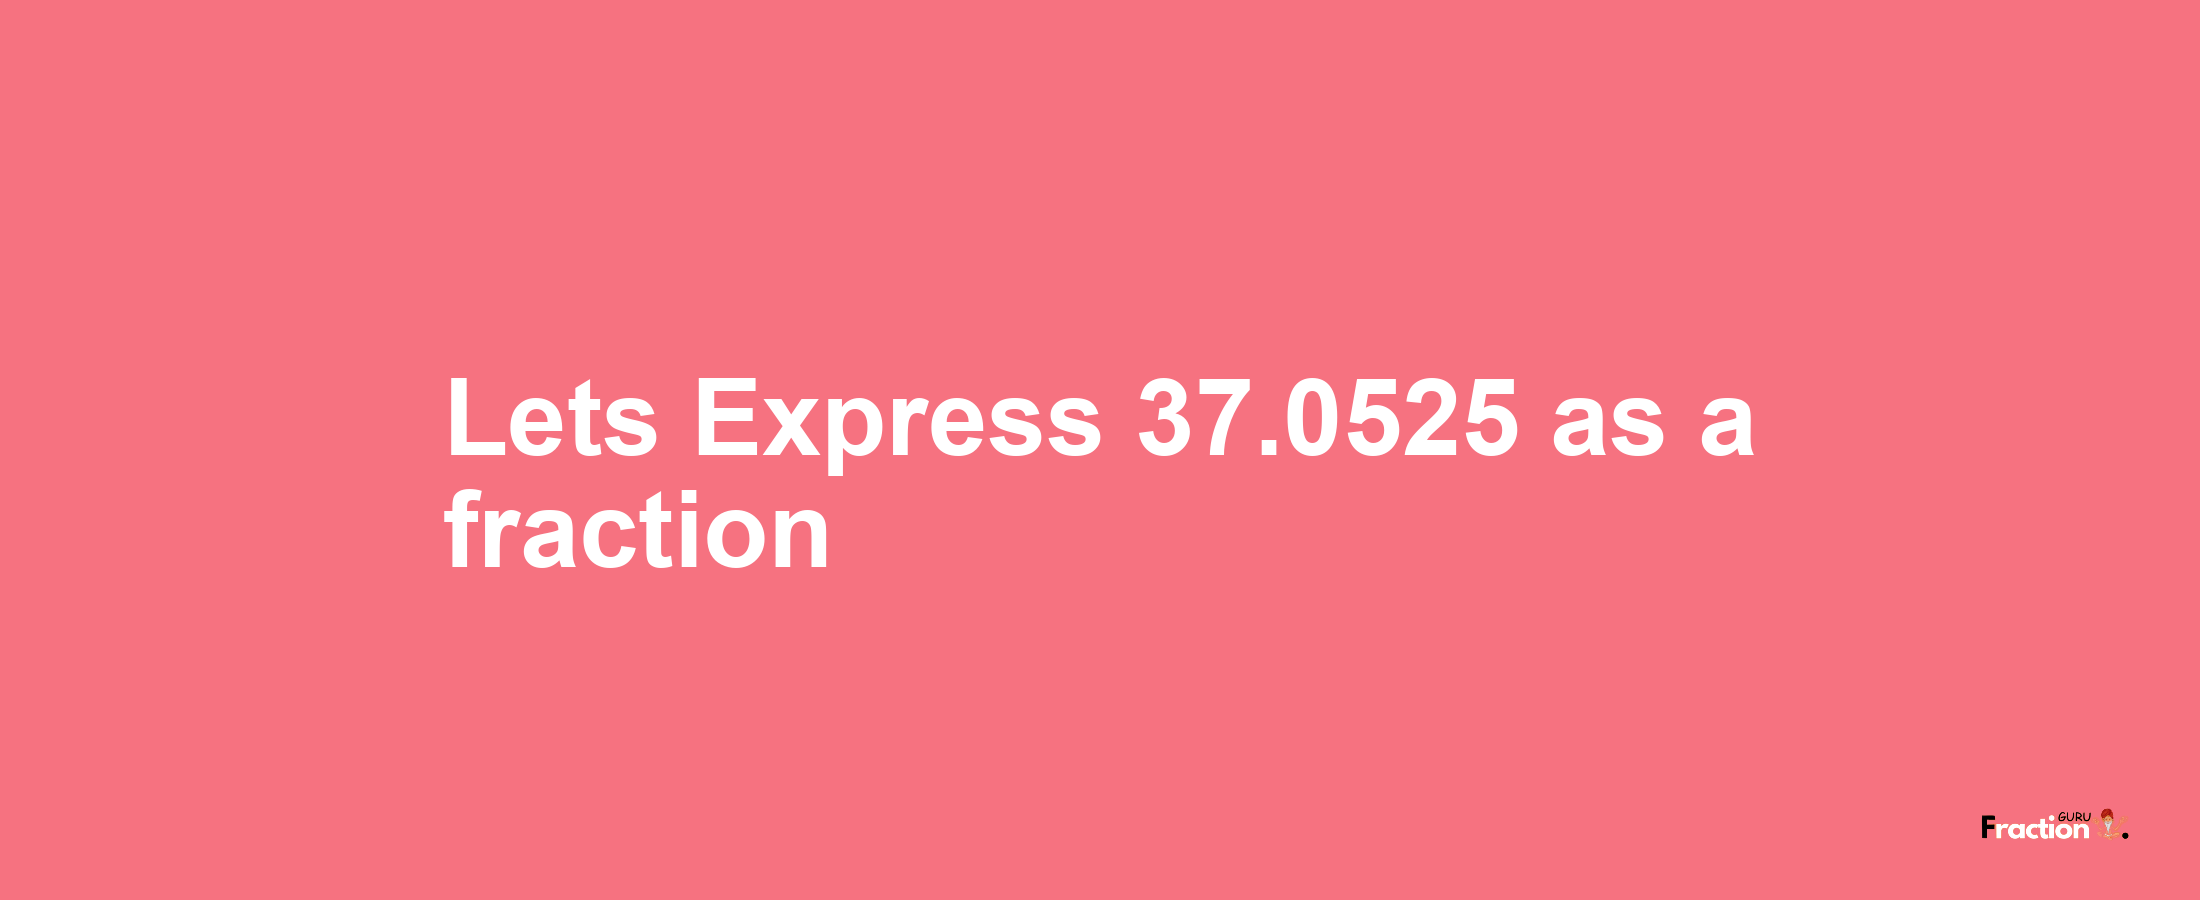 Lets Express 37.0525 as afraction